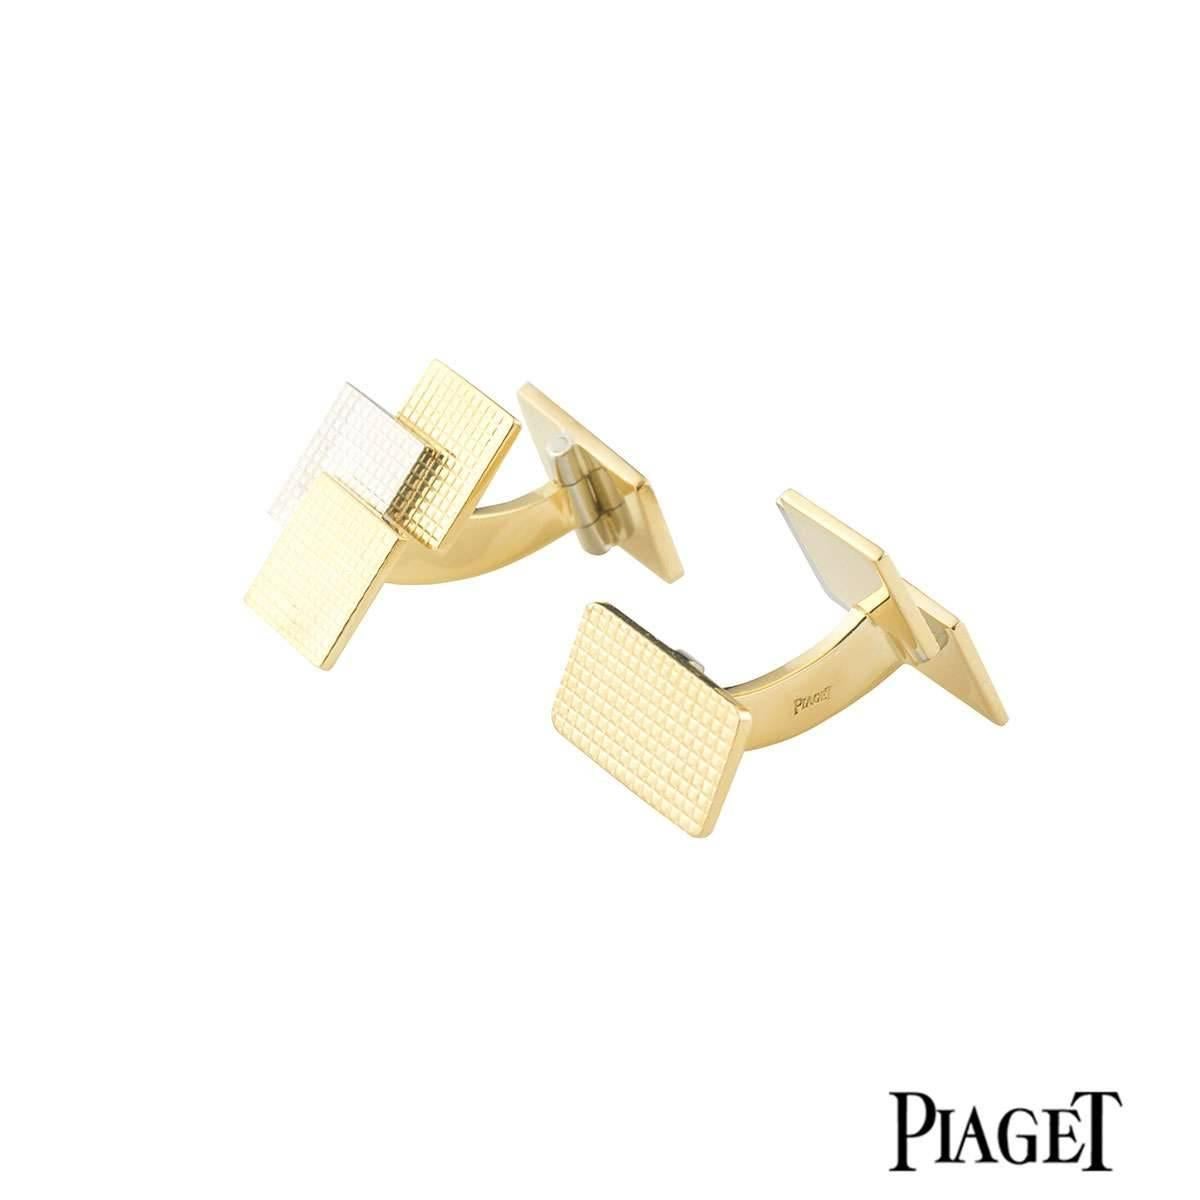 A pair of 18k white and yellow gold Piaget cufflinks. The cufflinks comprise of 3 squares with embossed grids on each abstractly positioned. There are two yellow gold squares and one white gold square. The cufflinks feature a T bar fitting and have